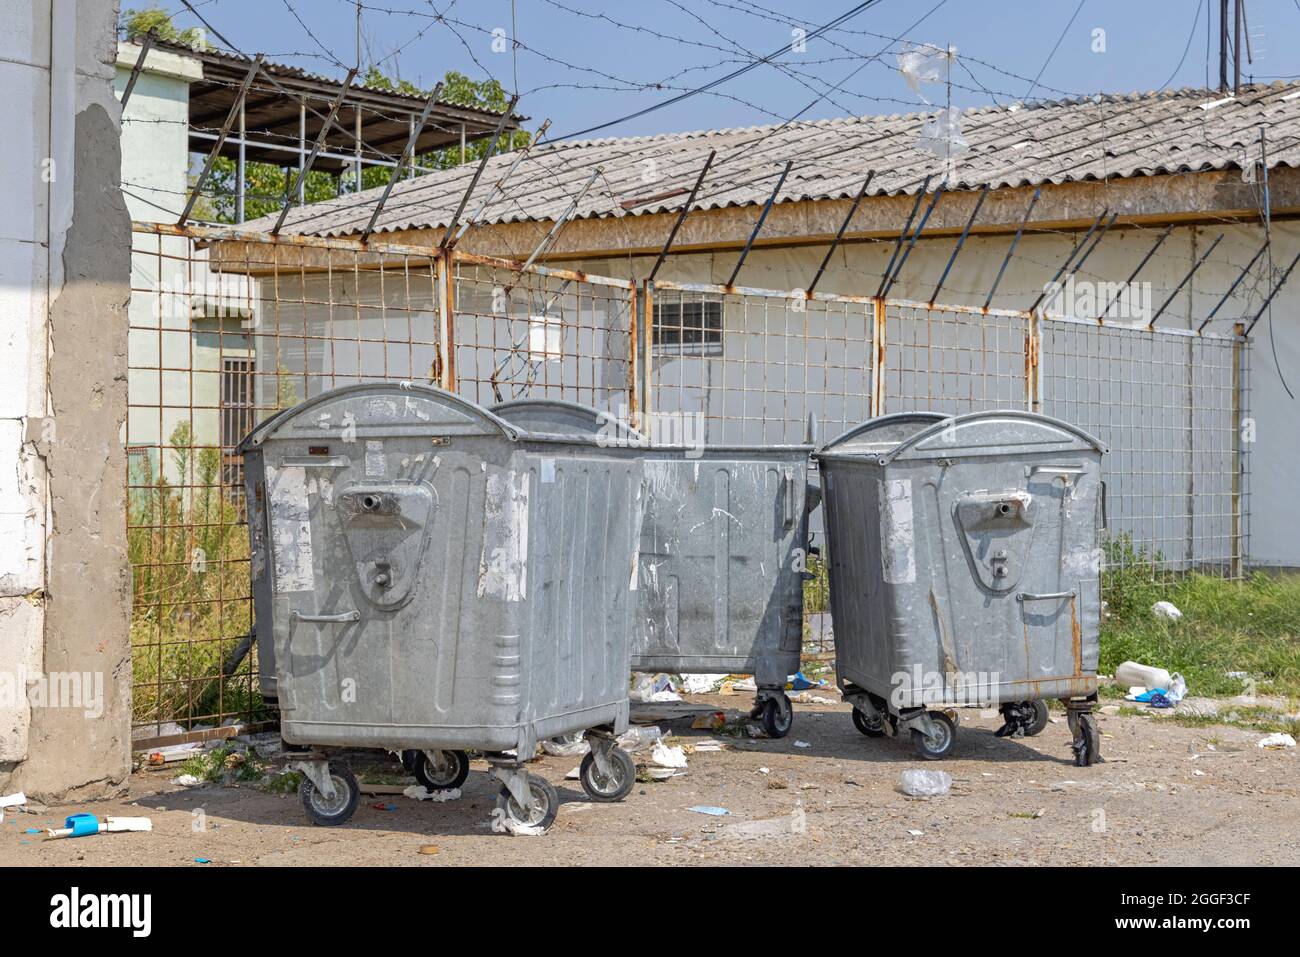 Big Metal Garbage Containers Waste City Stock Photo 2296435705